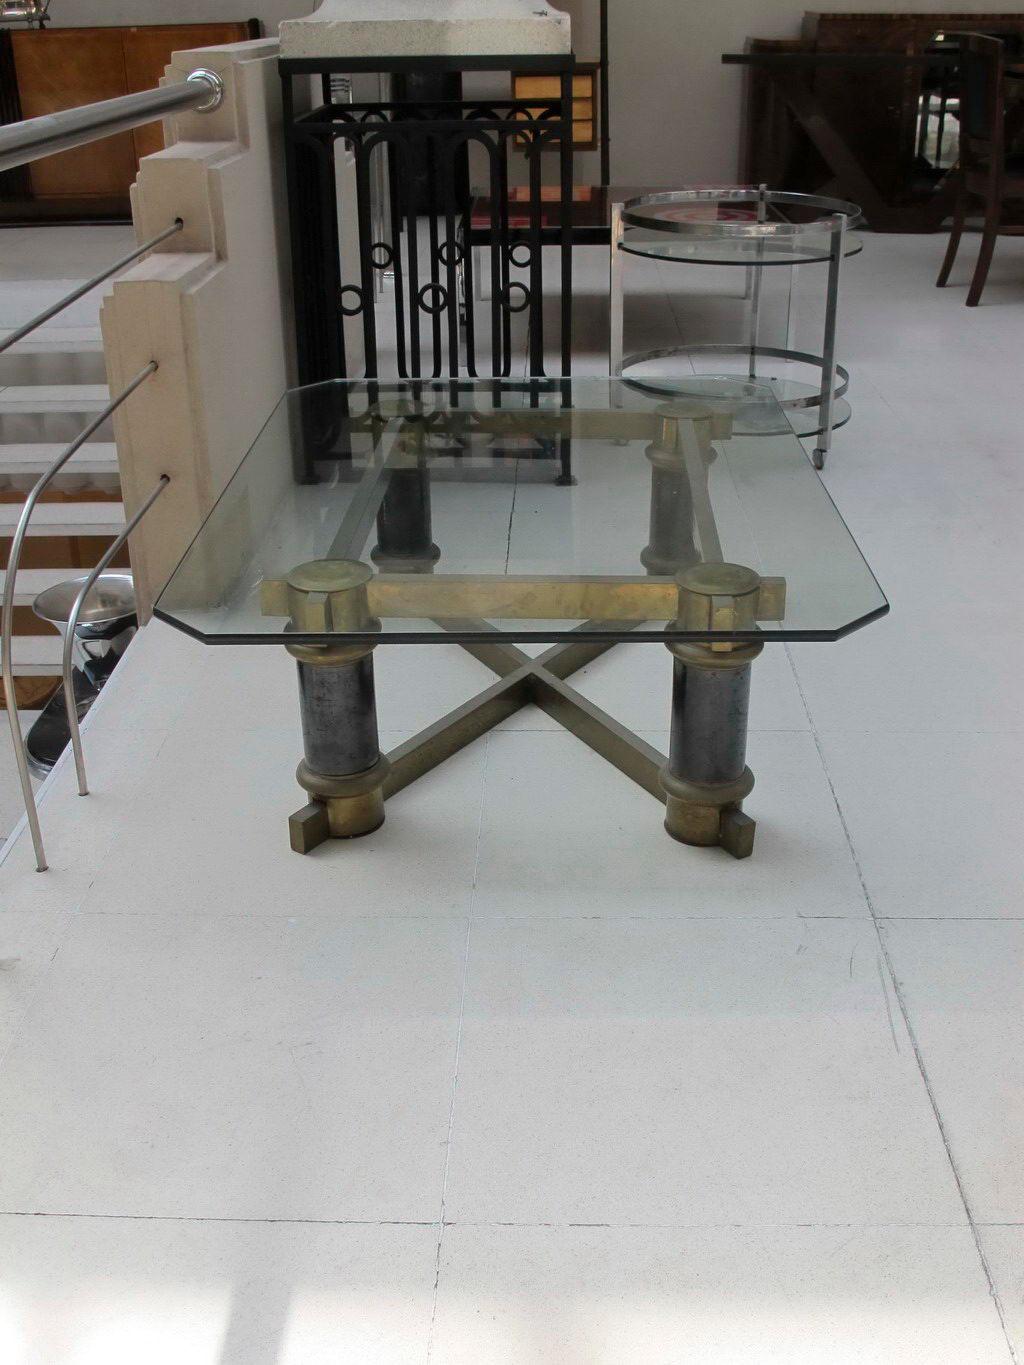 Coffe table

Materials: glass and bronze
Style: Art Deco
France
We have specialized in the sale of Art Deco and Art Nouveau and Vintage styles since 1982. If you have any questions we are at your disposal.
Pushing the button that reads 'View All